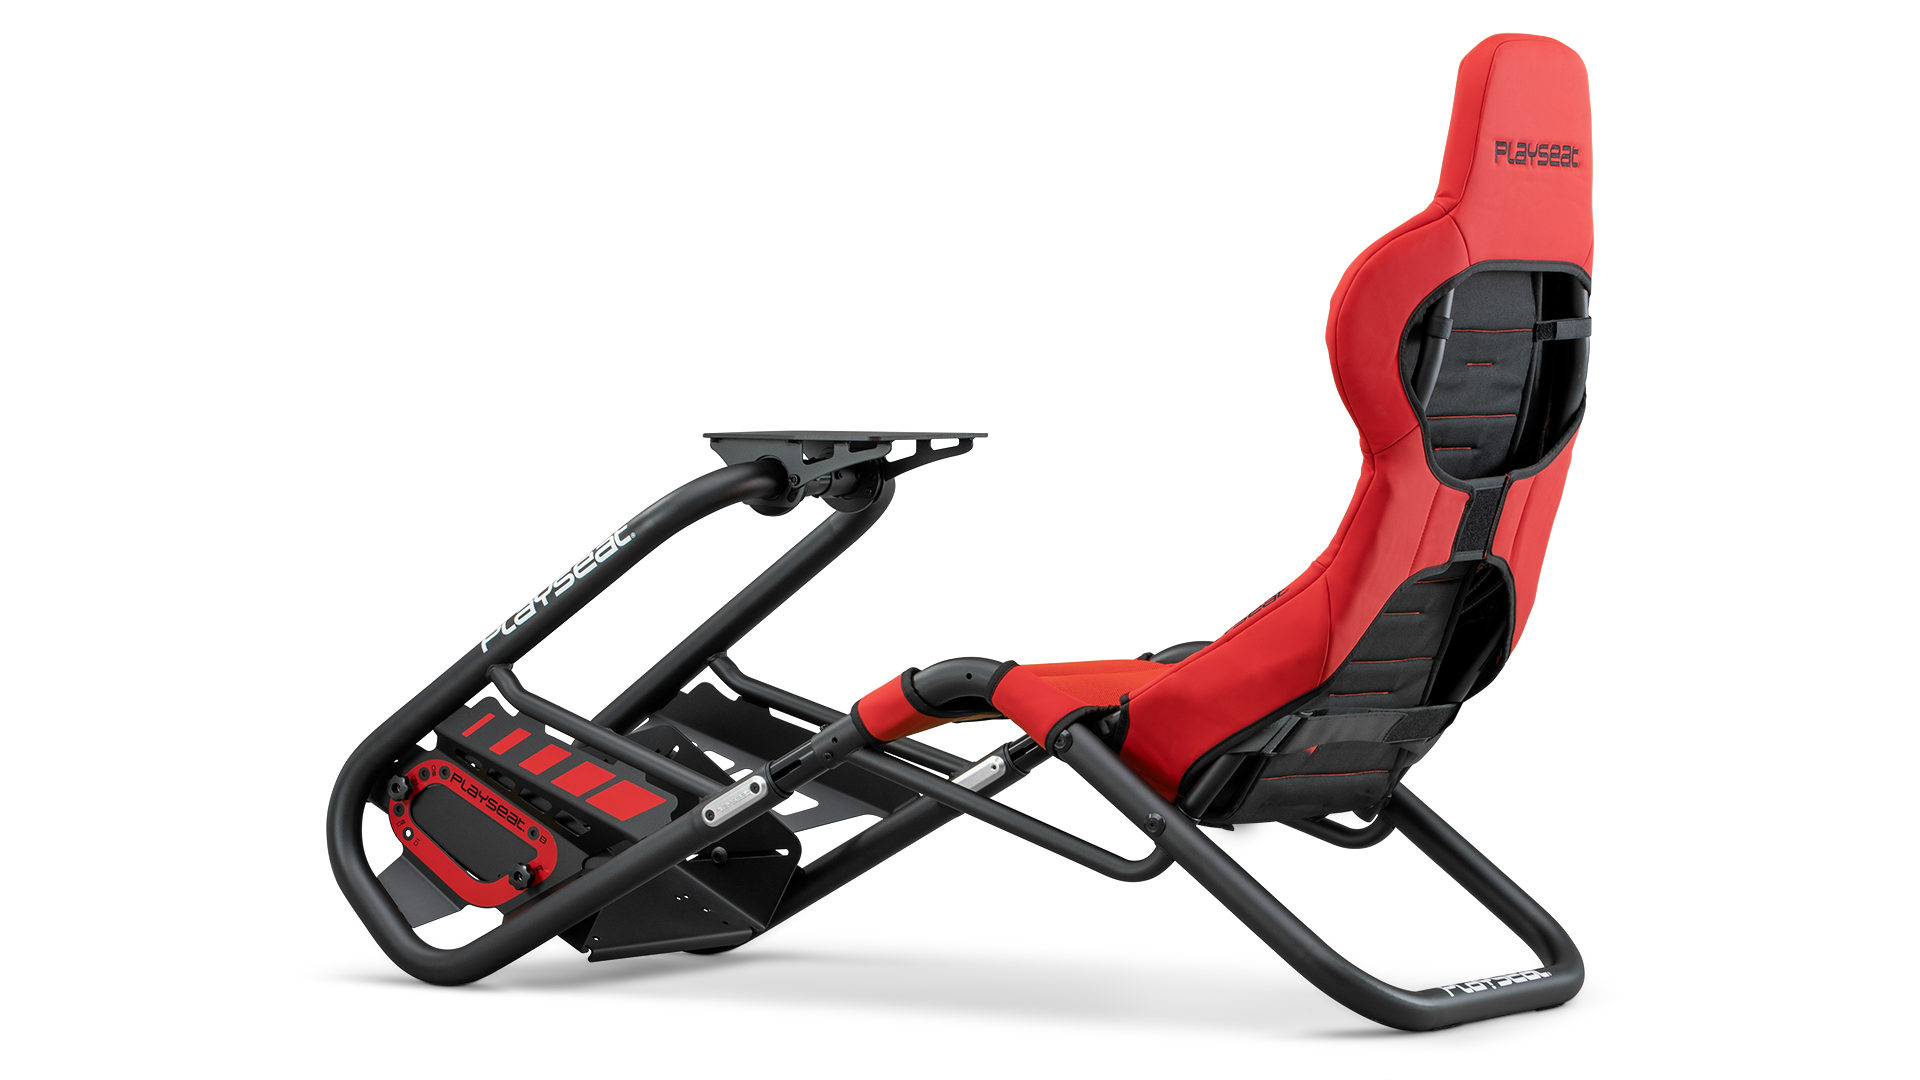 playseat-trophy-red-direct-drive-simulator-back-angle-view-1920x1080-5.png